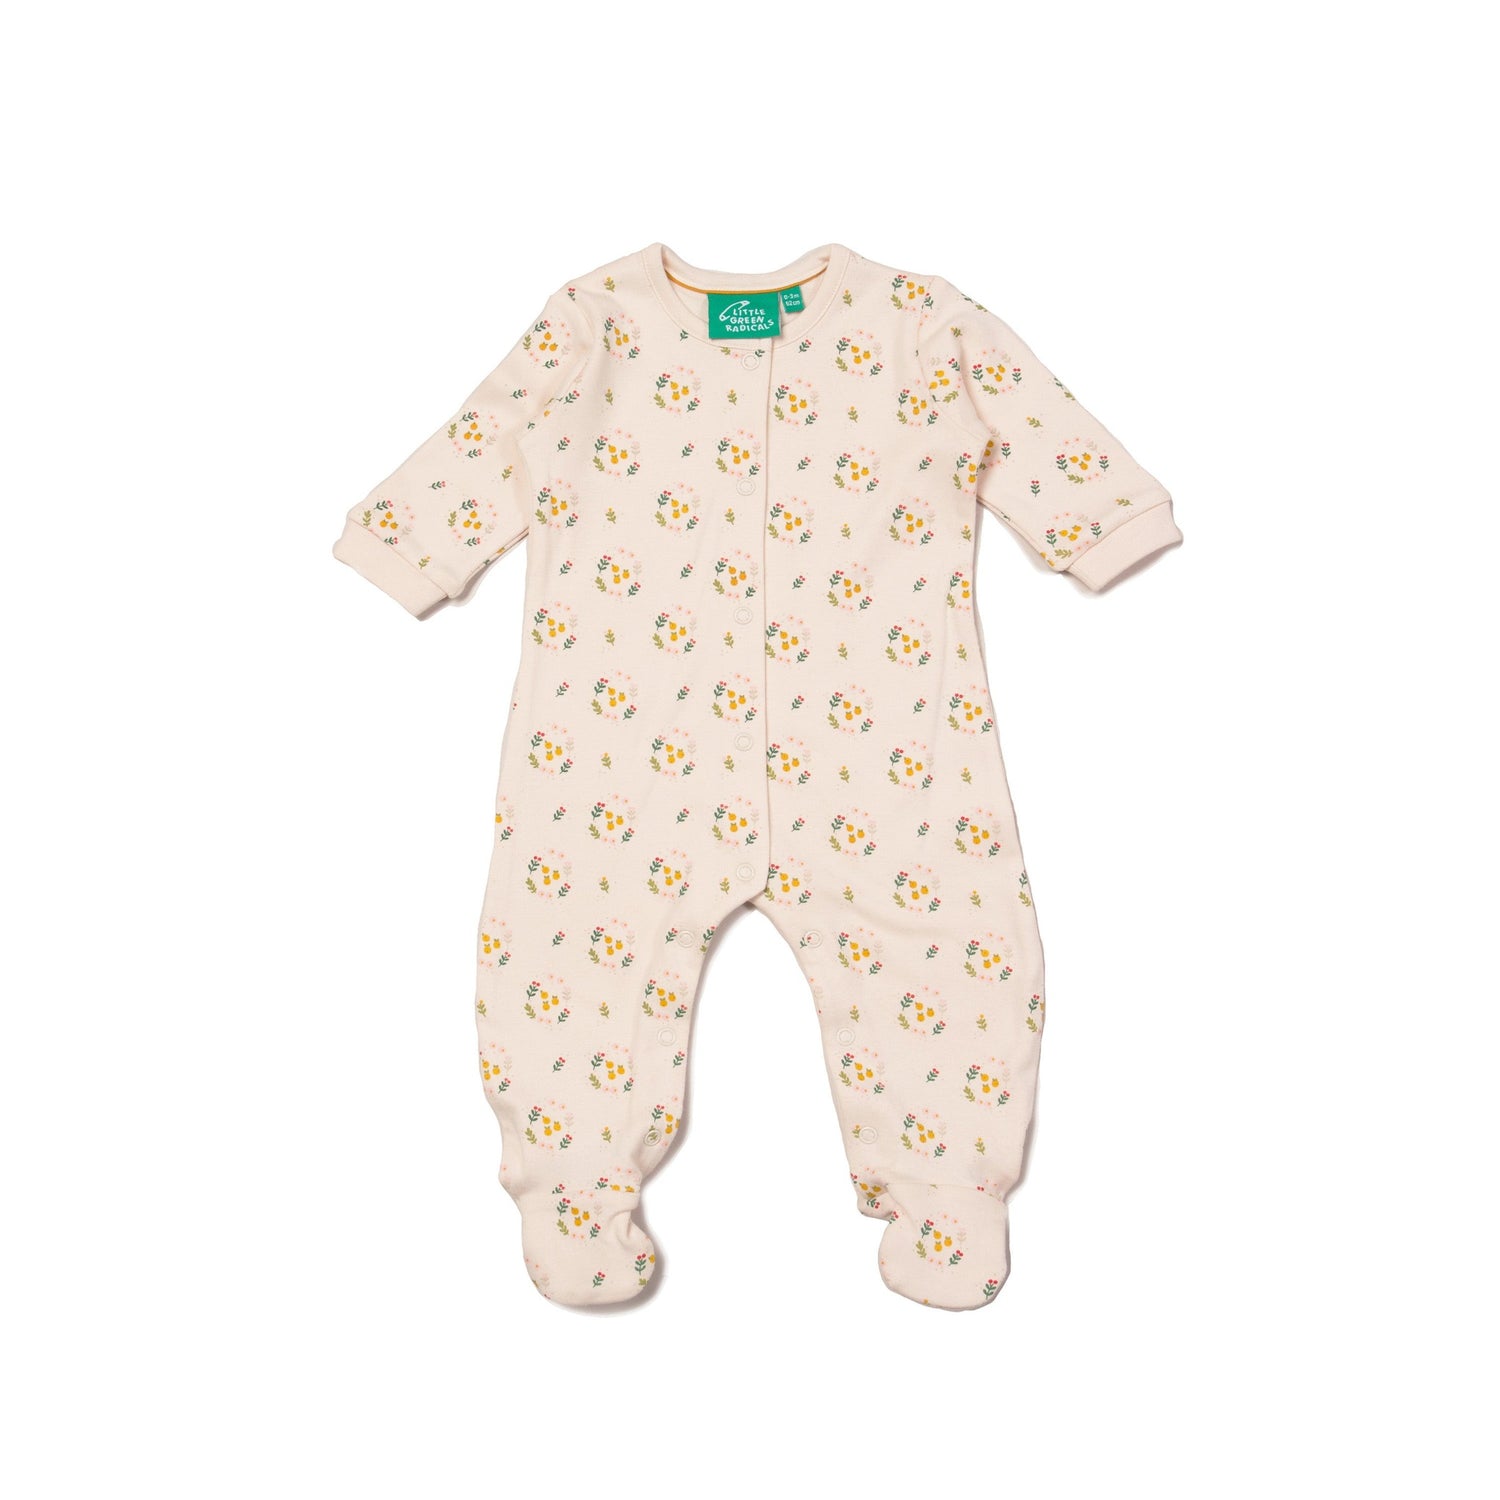 Quince flowers baby sleepsuit